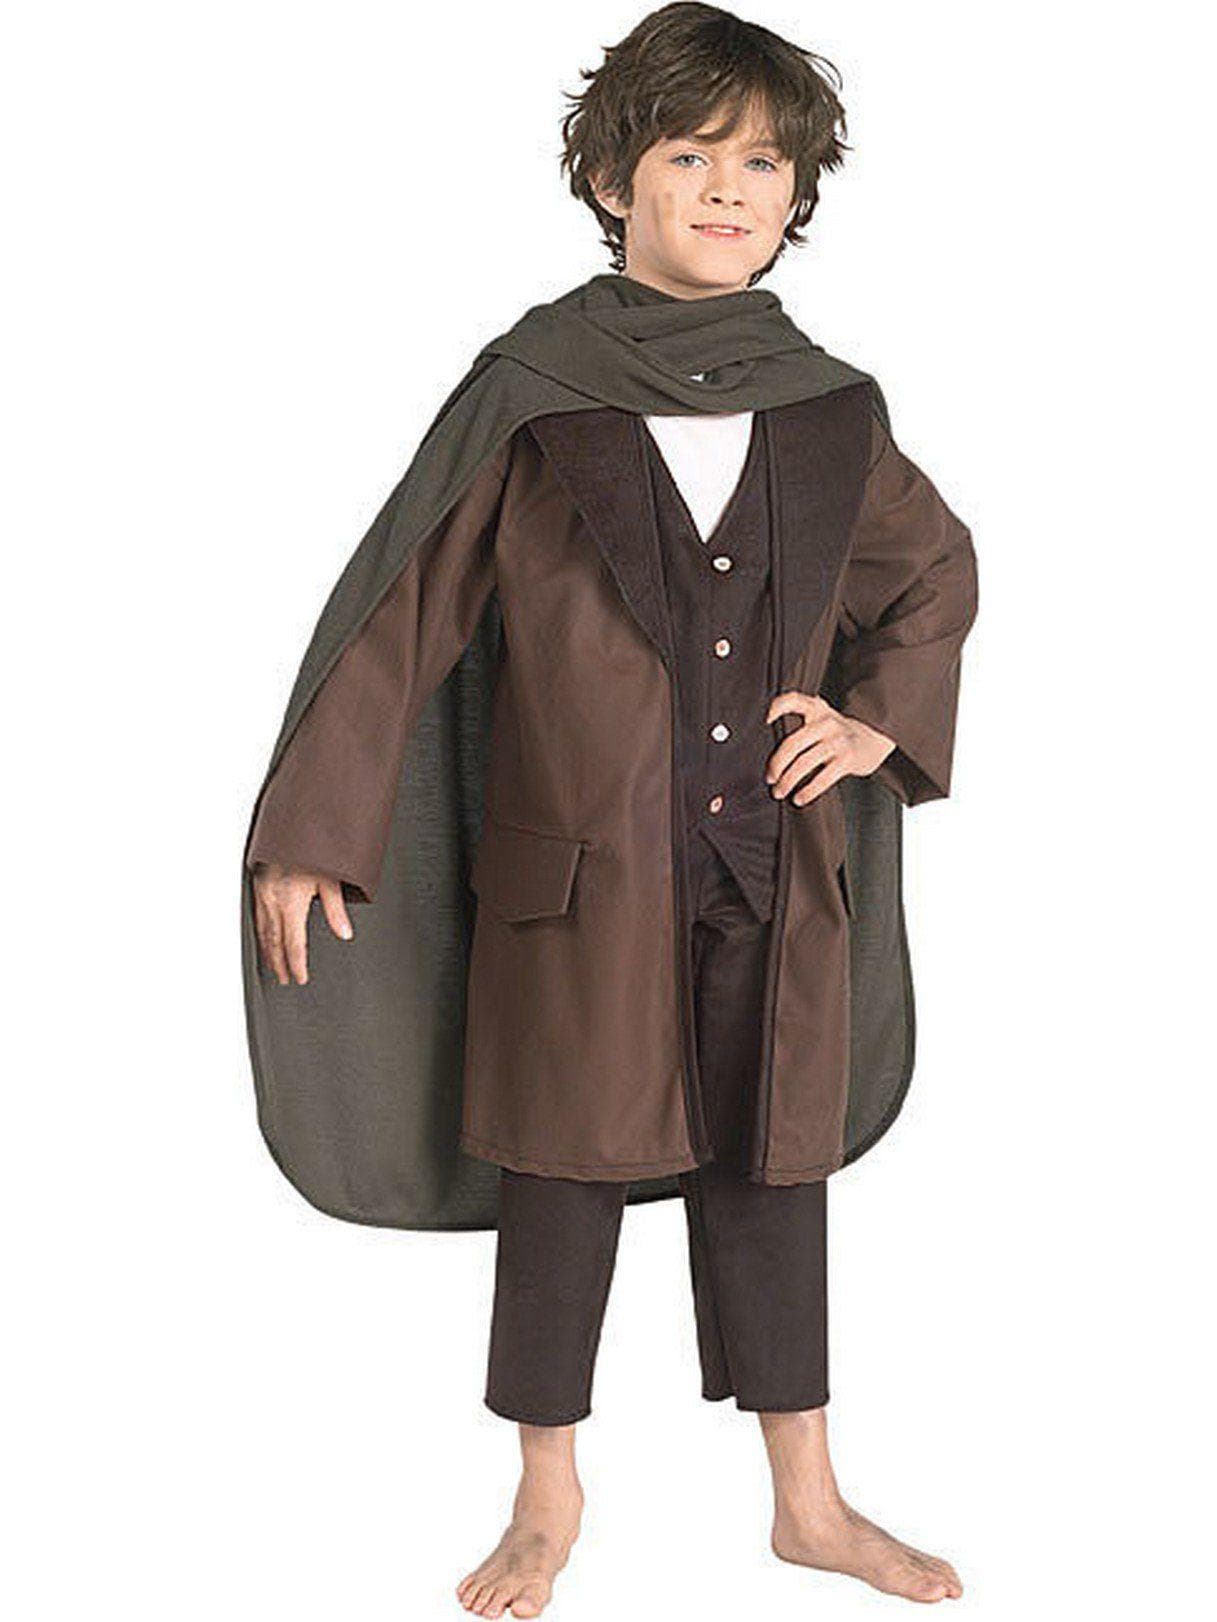 The Lord of the Rings Child Frodo Costume